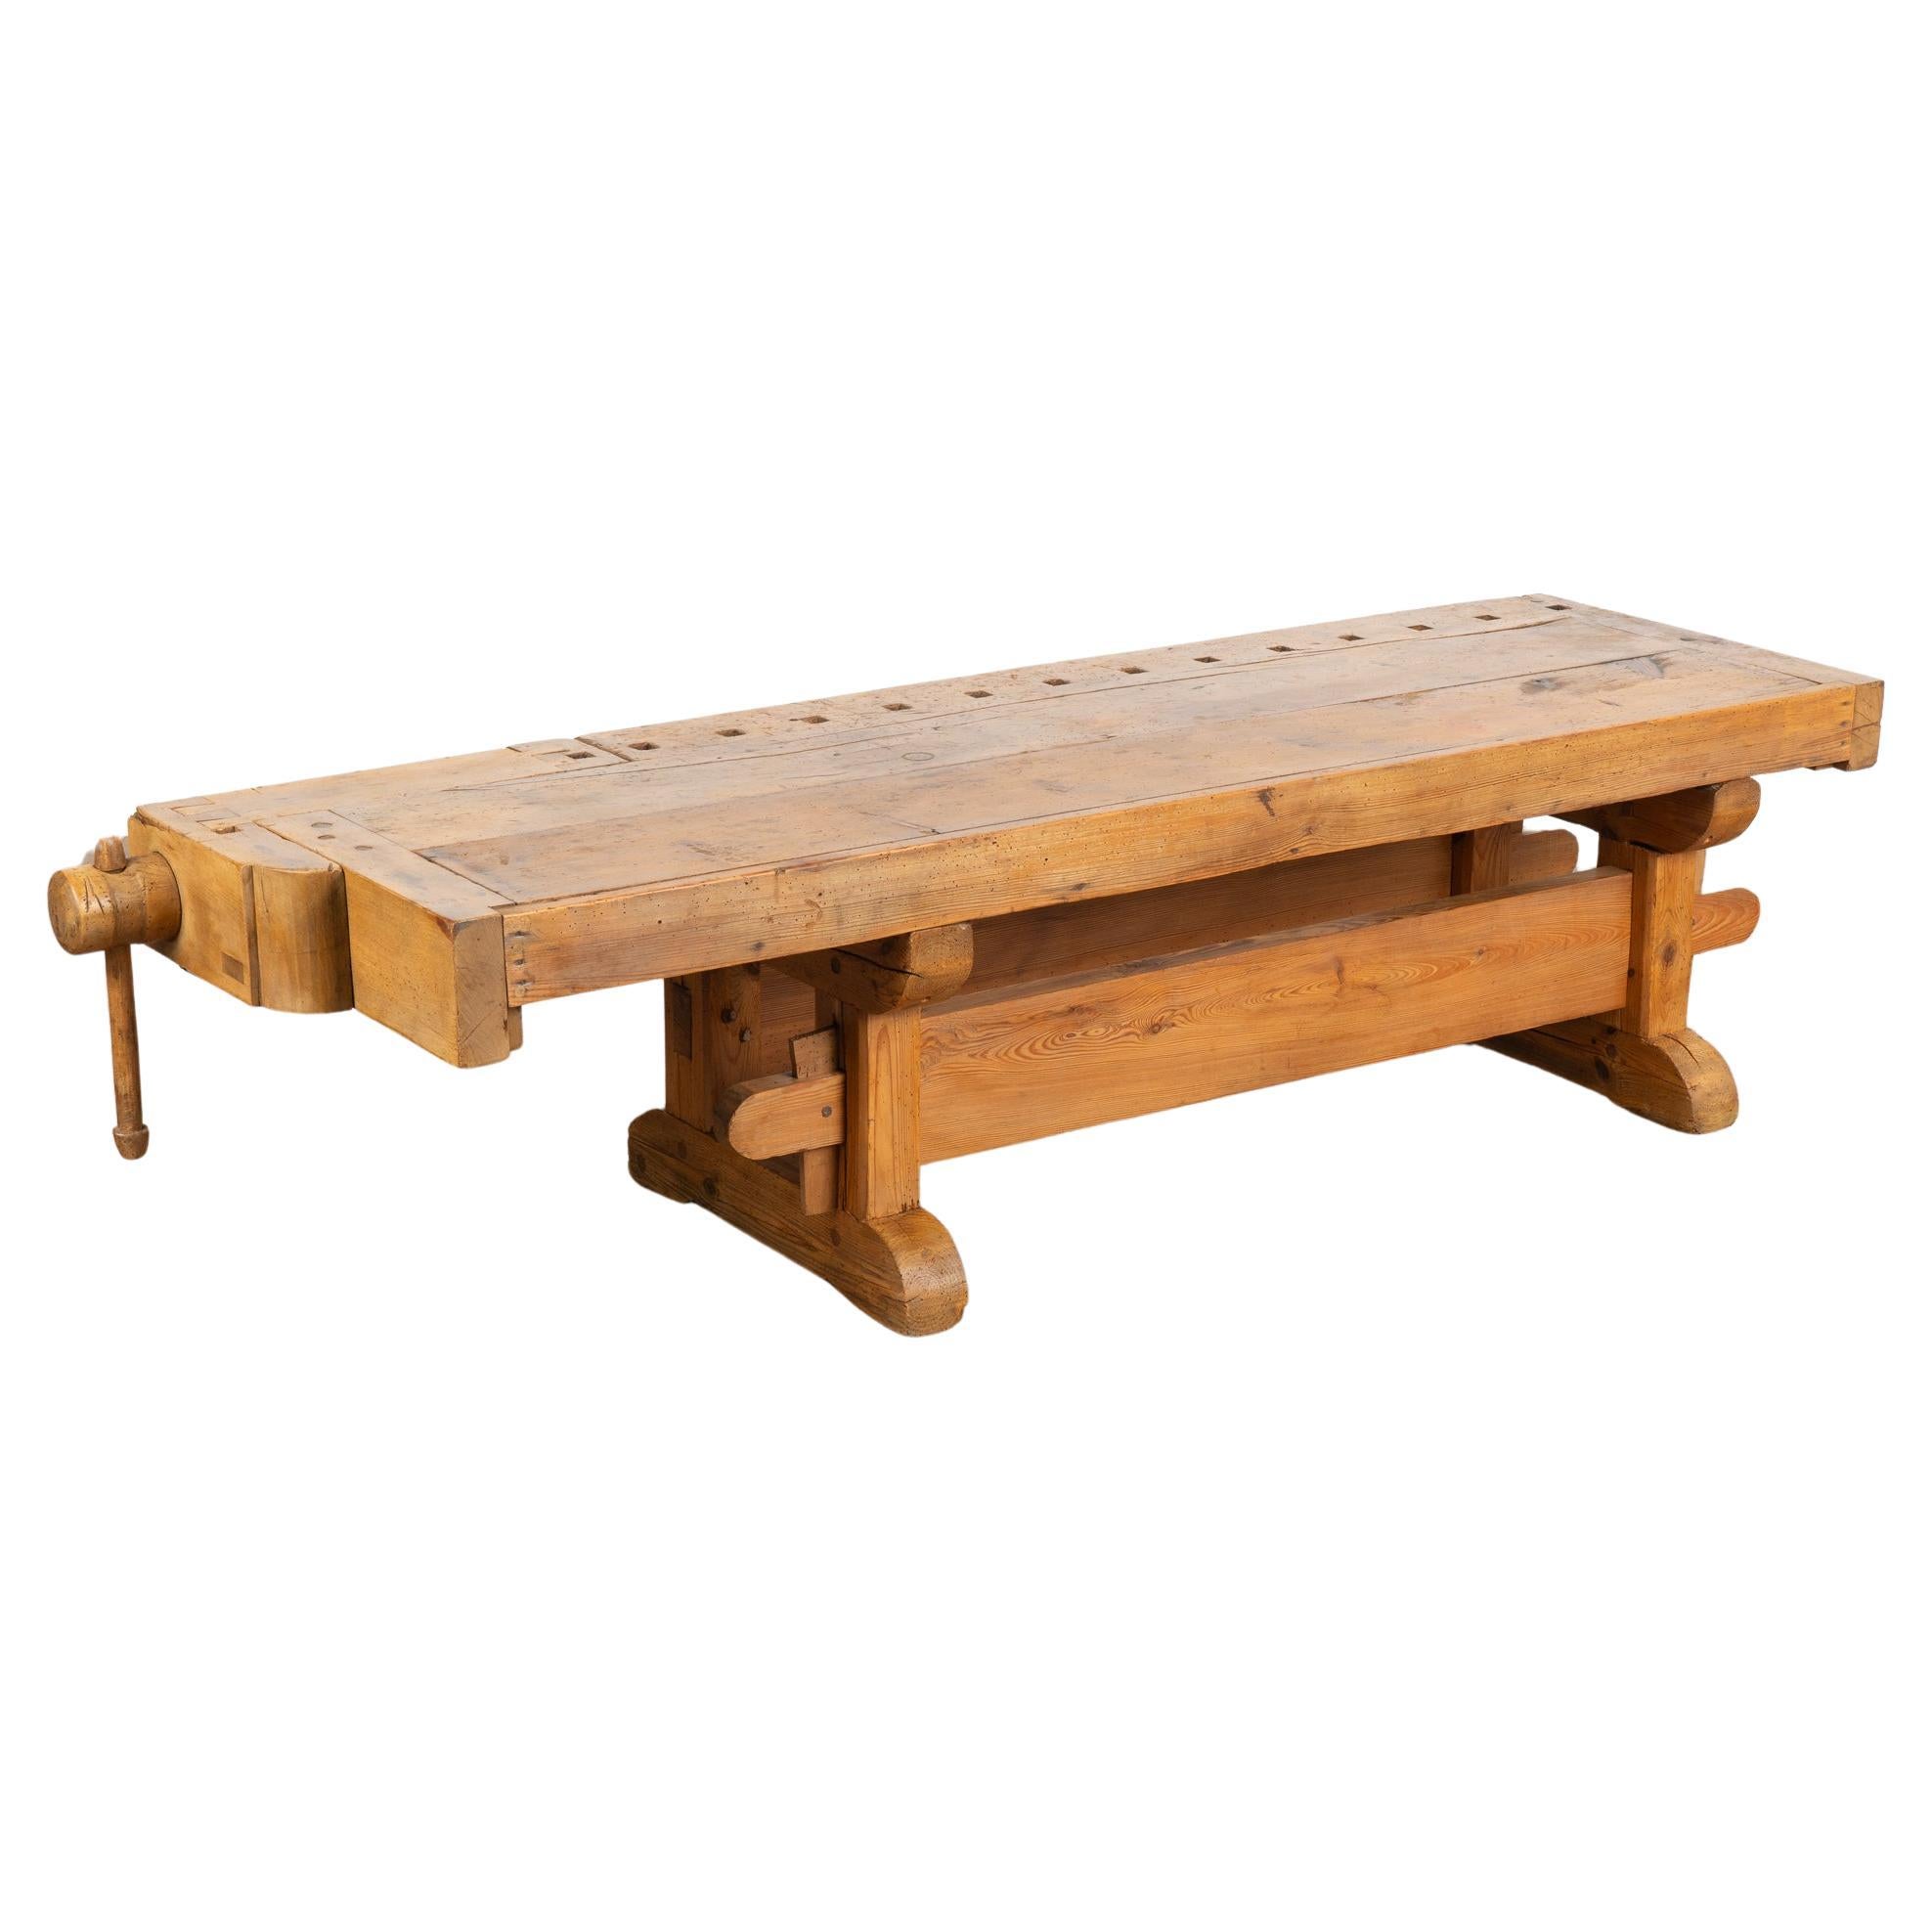 Rustic Coffee Table Made from Carpenters Workbench, Denmark circa 1920